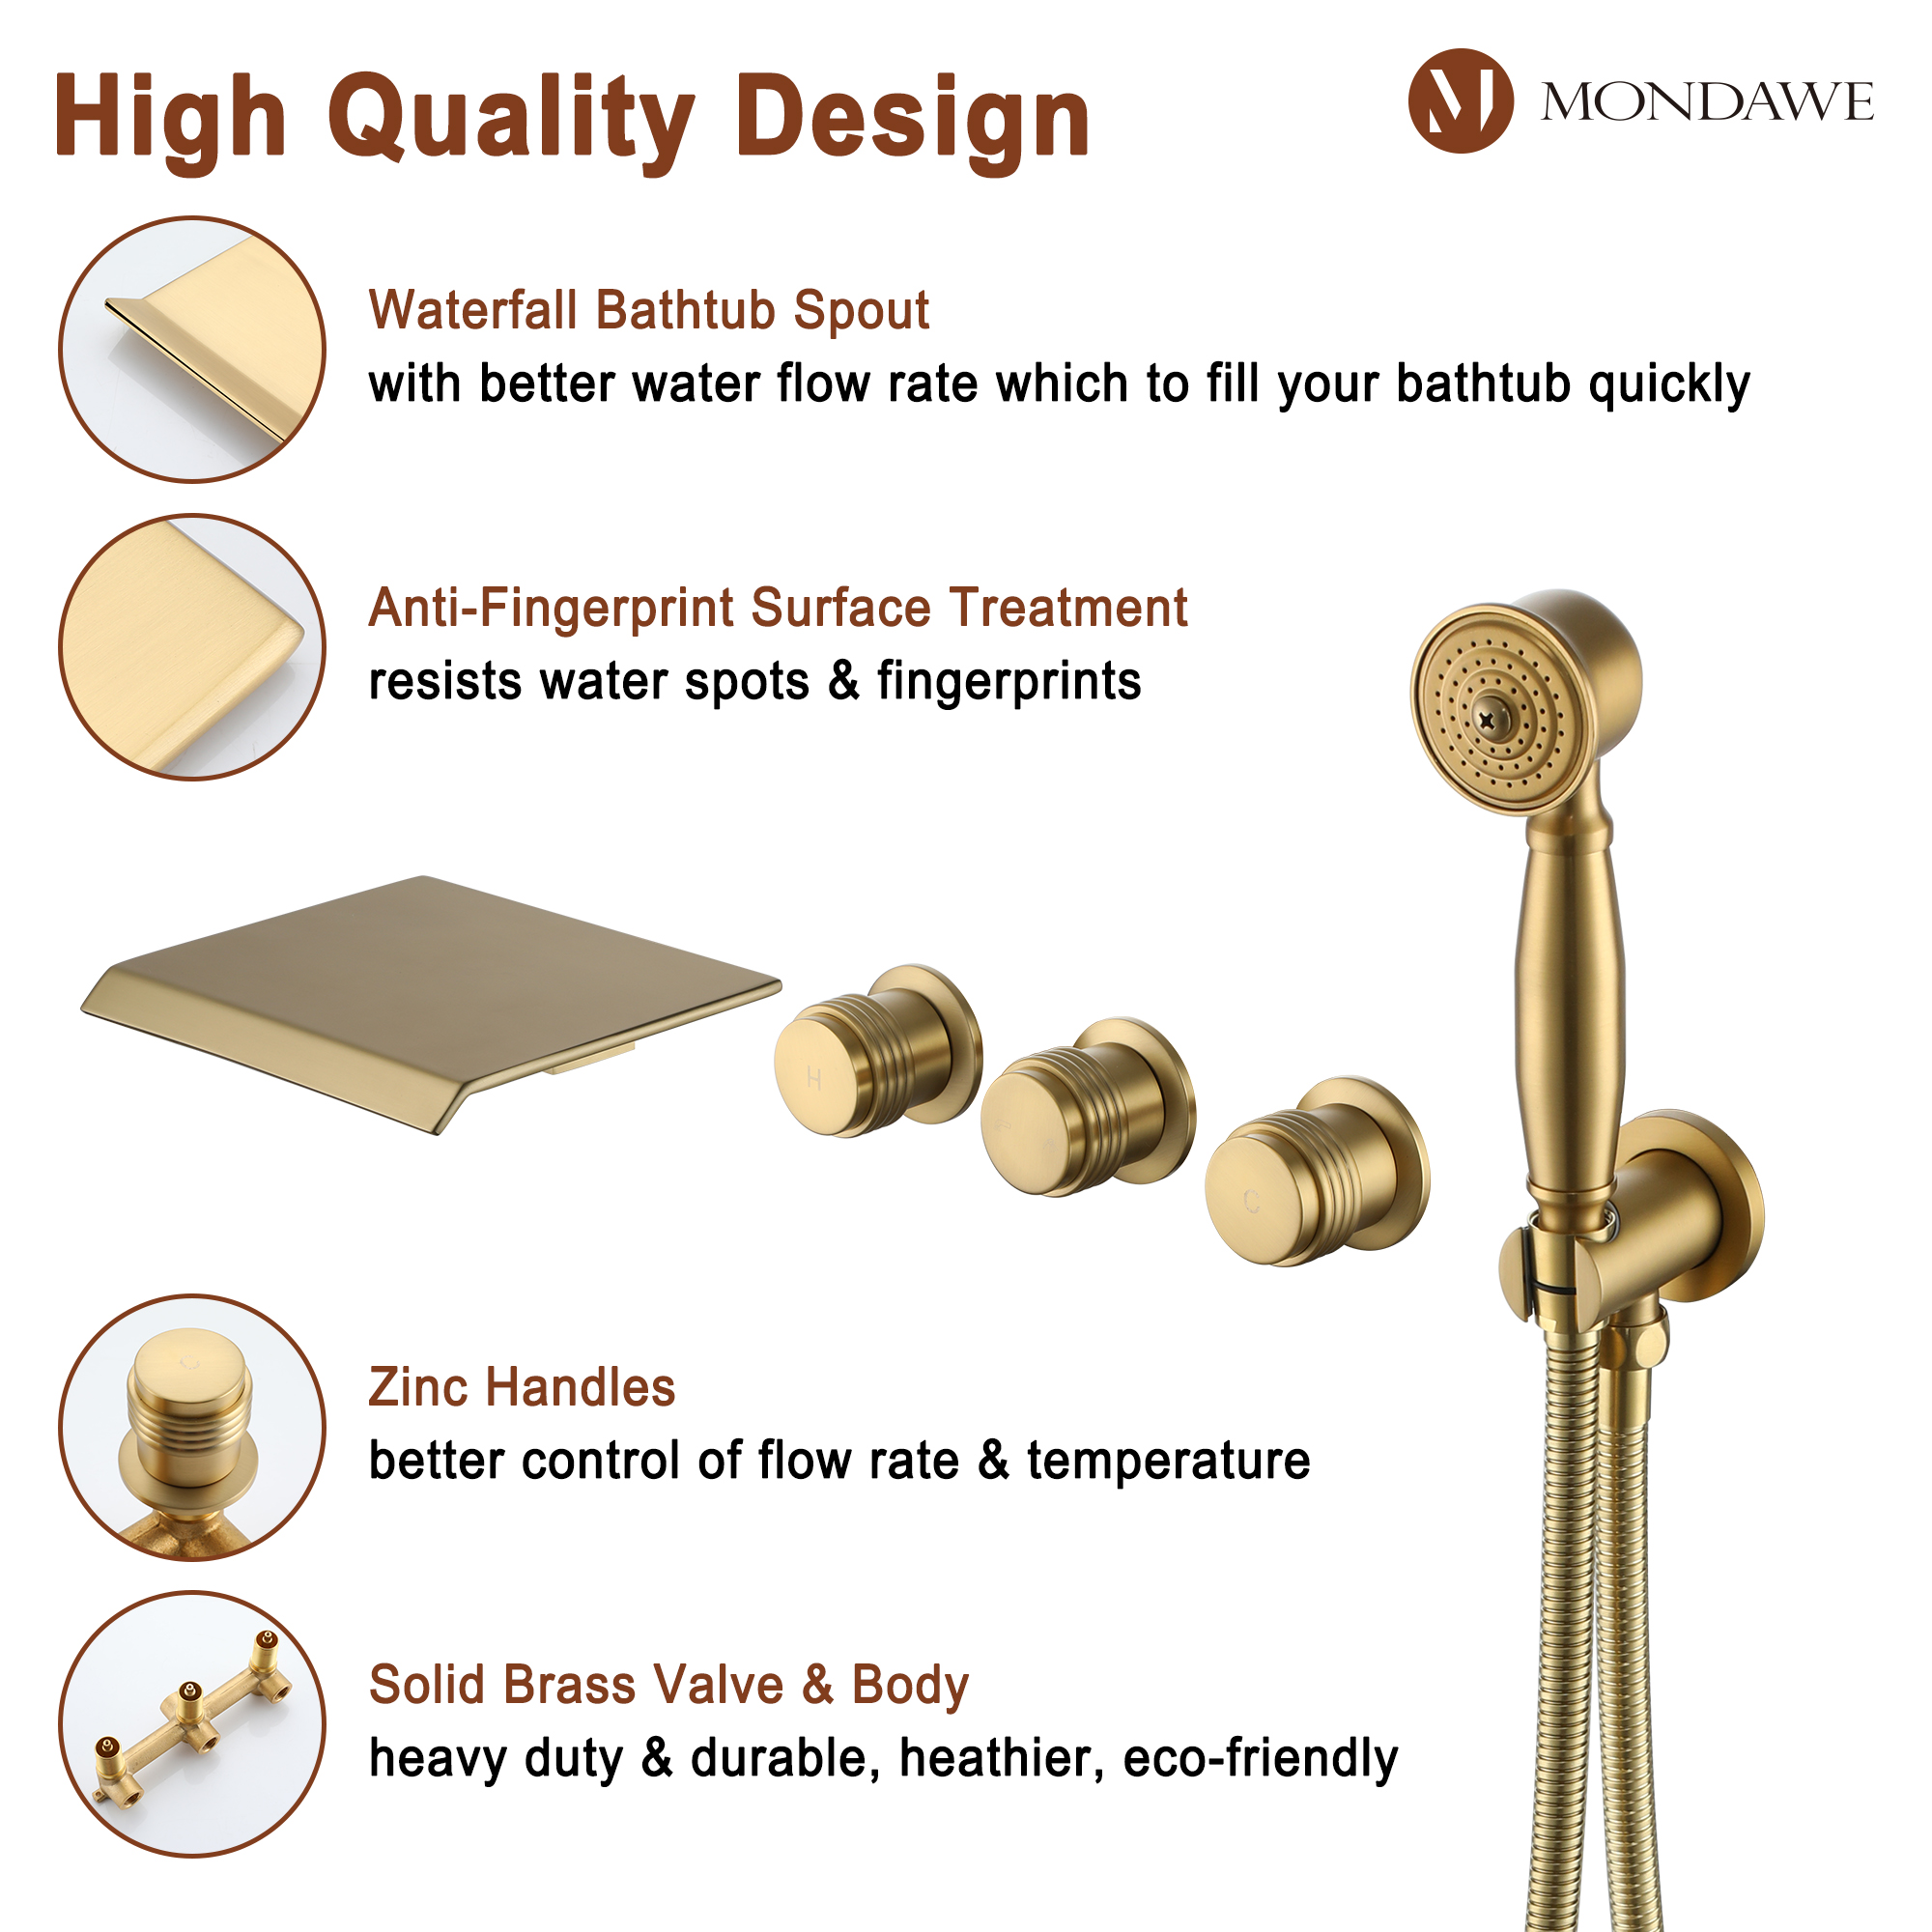 Eleanor 3-Handle Waterfall Wide-Spray High Pressure Tub and Shower Faucet With Valve